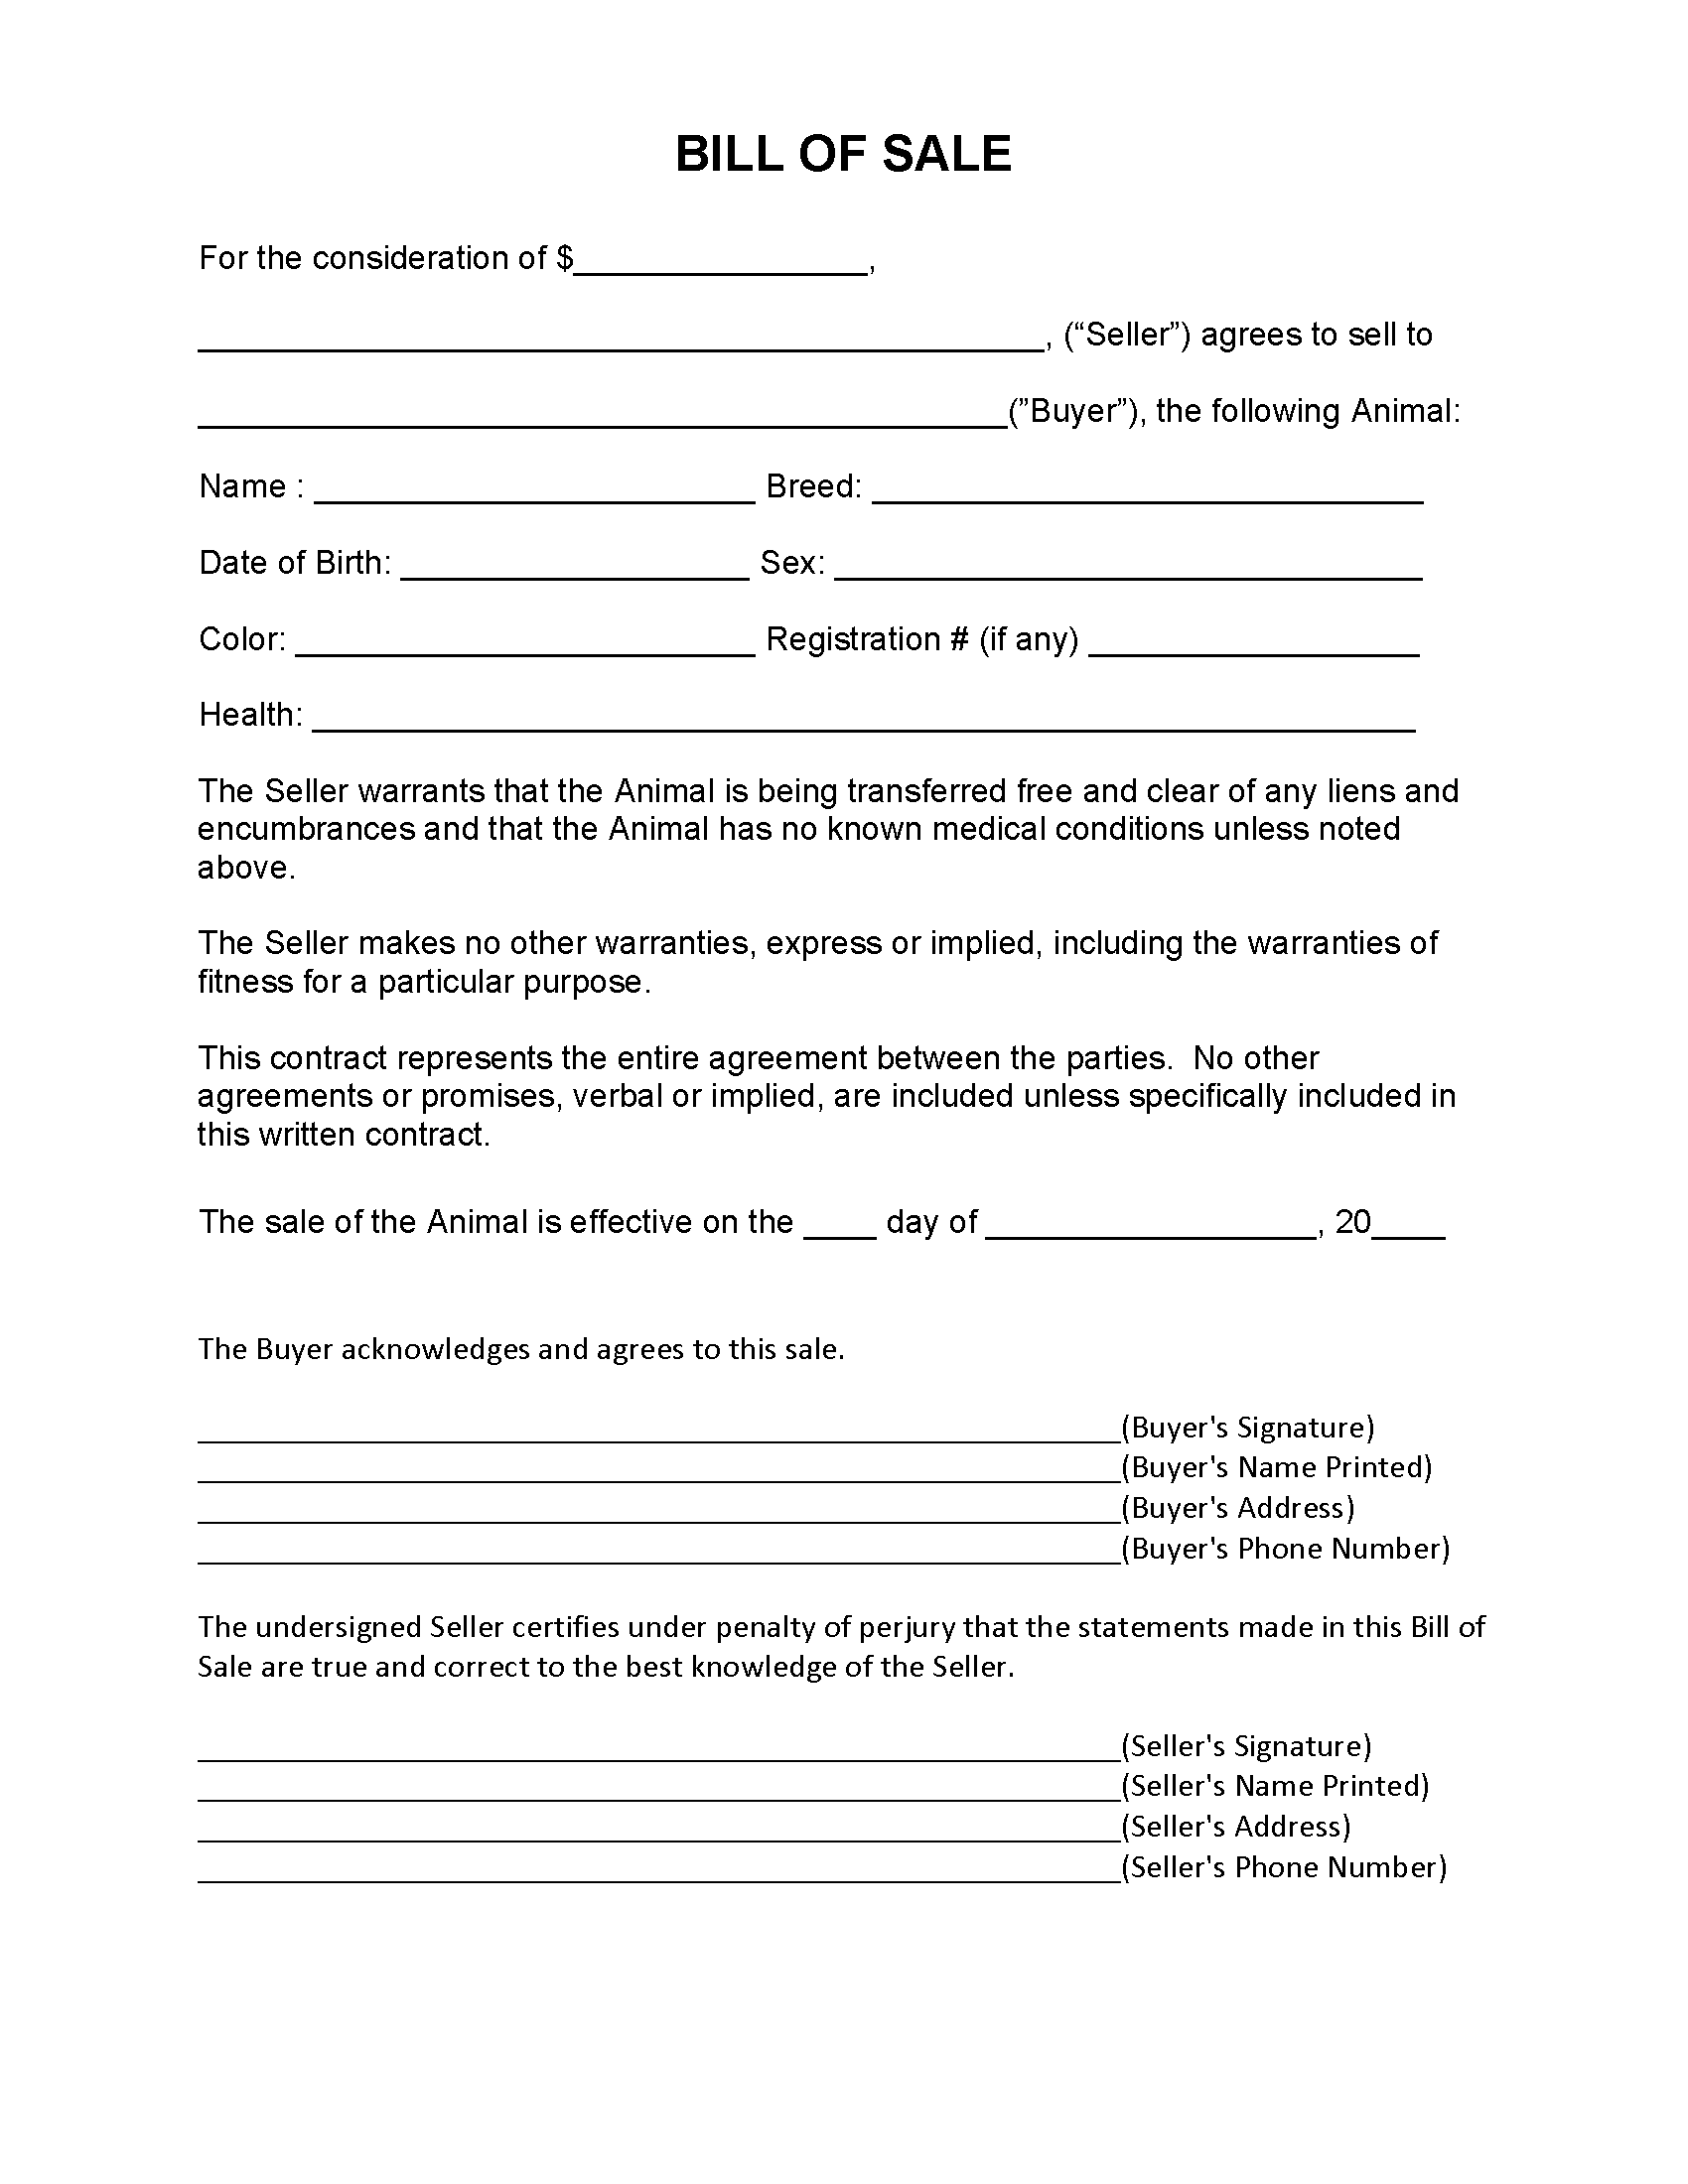 bill-of-sale-forms-free-printable-legal-forms-vrogue